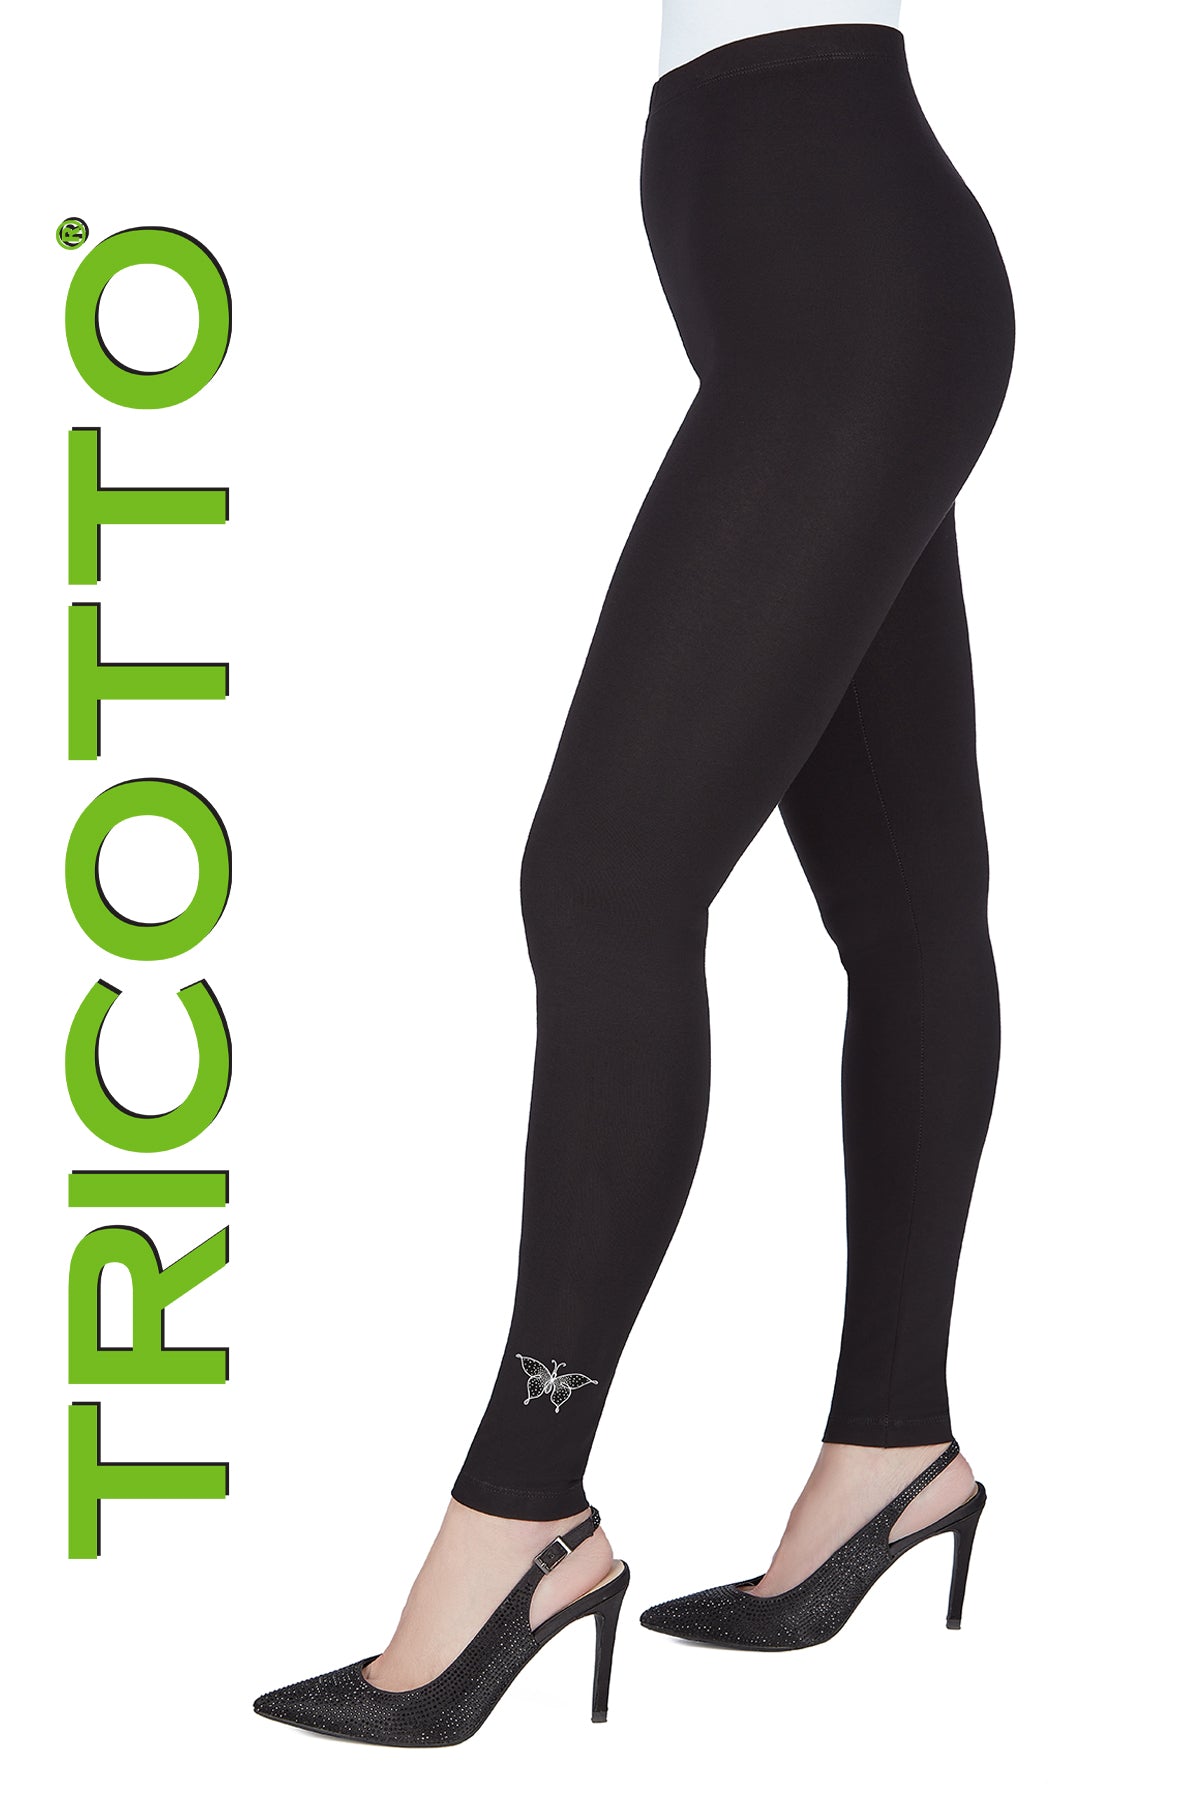 Tricotto Black Leggings-Buy Tricotto Leggings Online-Tricotto Clothing Montreal-Tricotto Butterfly Legging